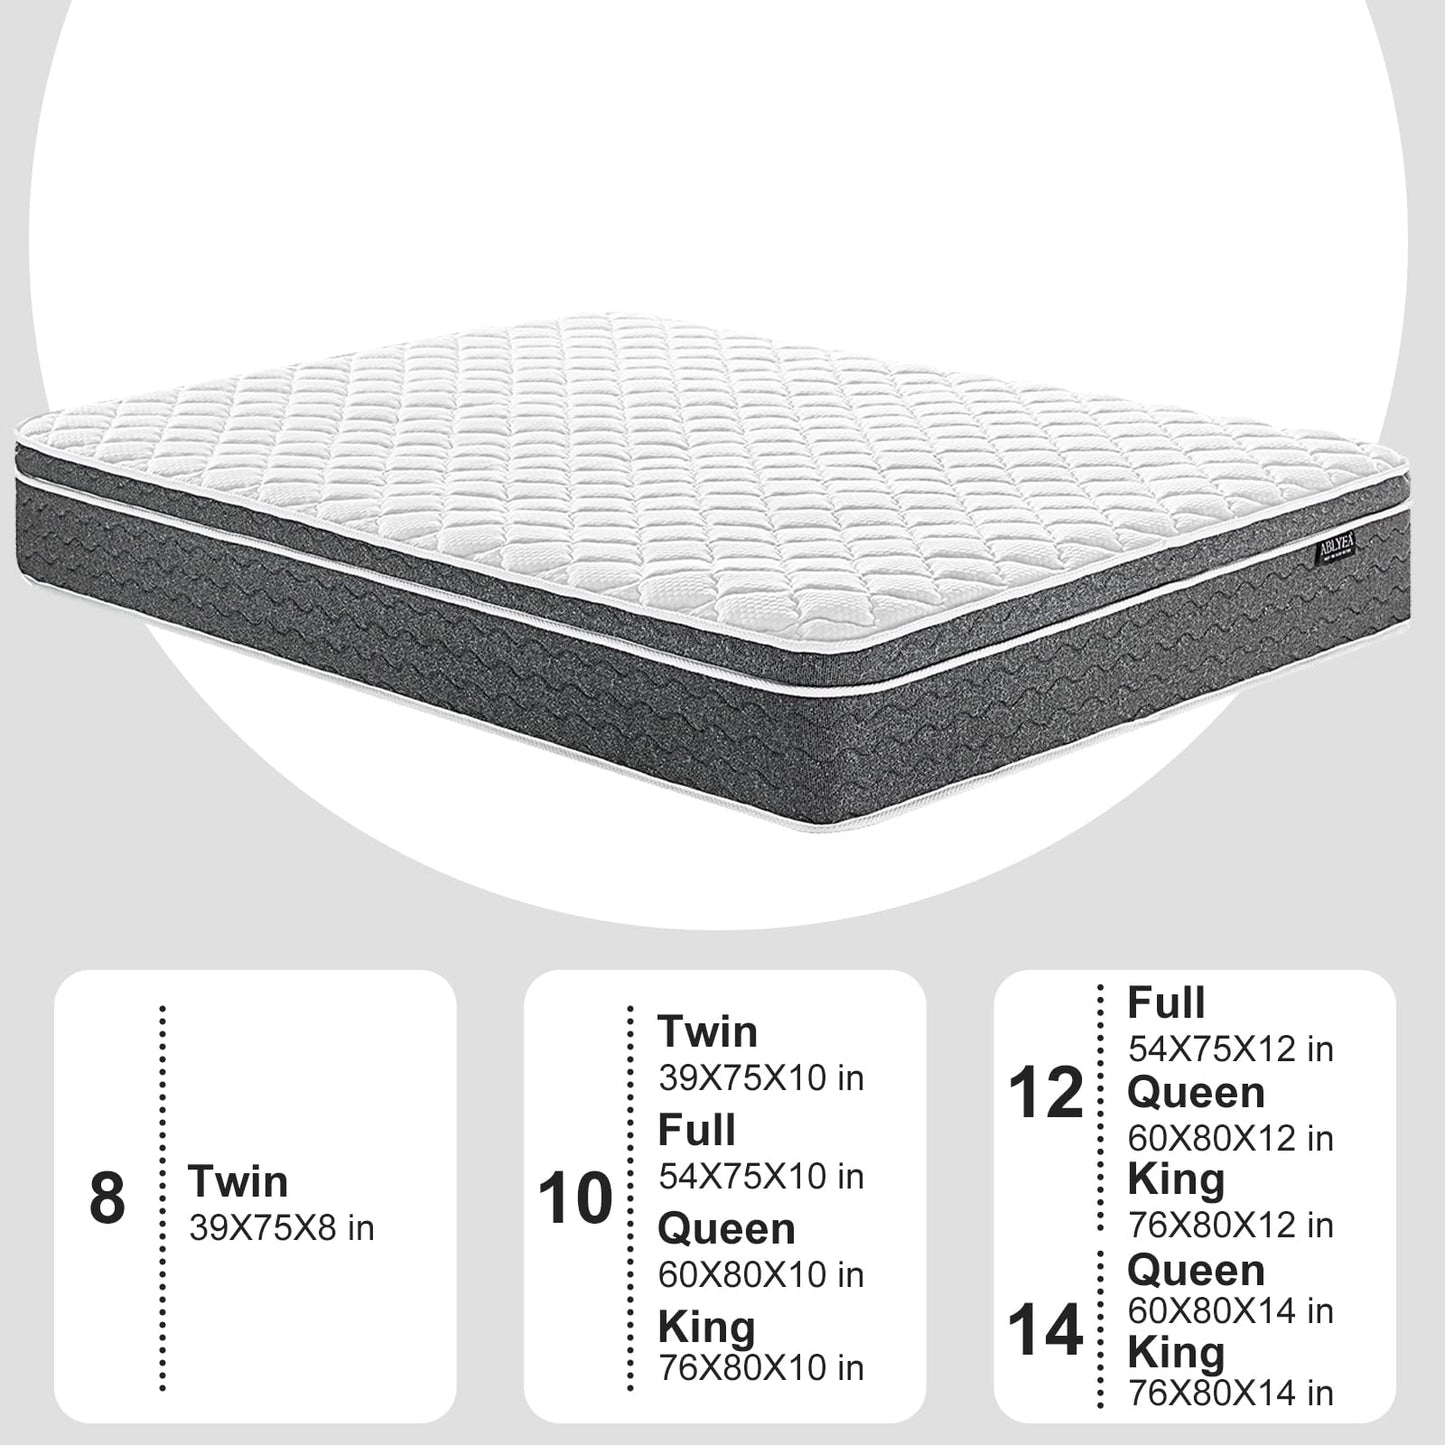 Ablyea King Mattress 12 Inch Hybrid Mattress in a Box with Gel Memory Foam, Individually Wrapped Pocket Coils Innerspring, CertiPUR-US Certified, Pressure Relief & Support, Medium Firm